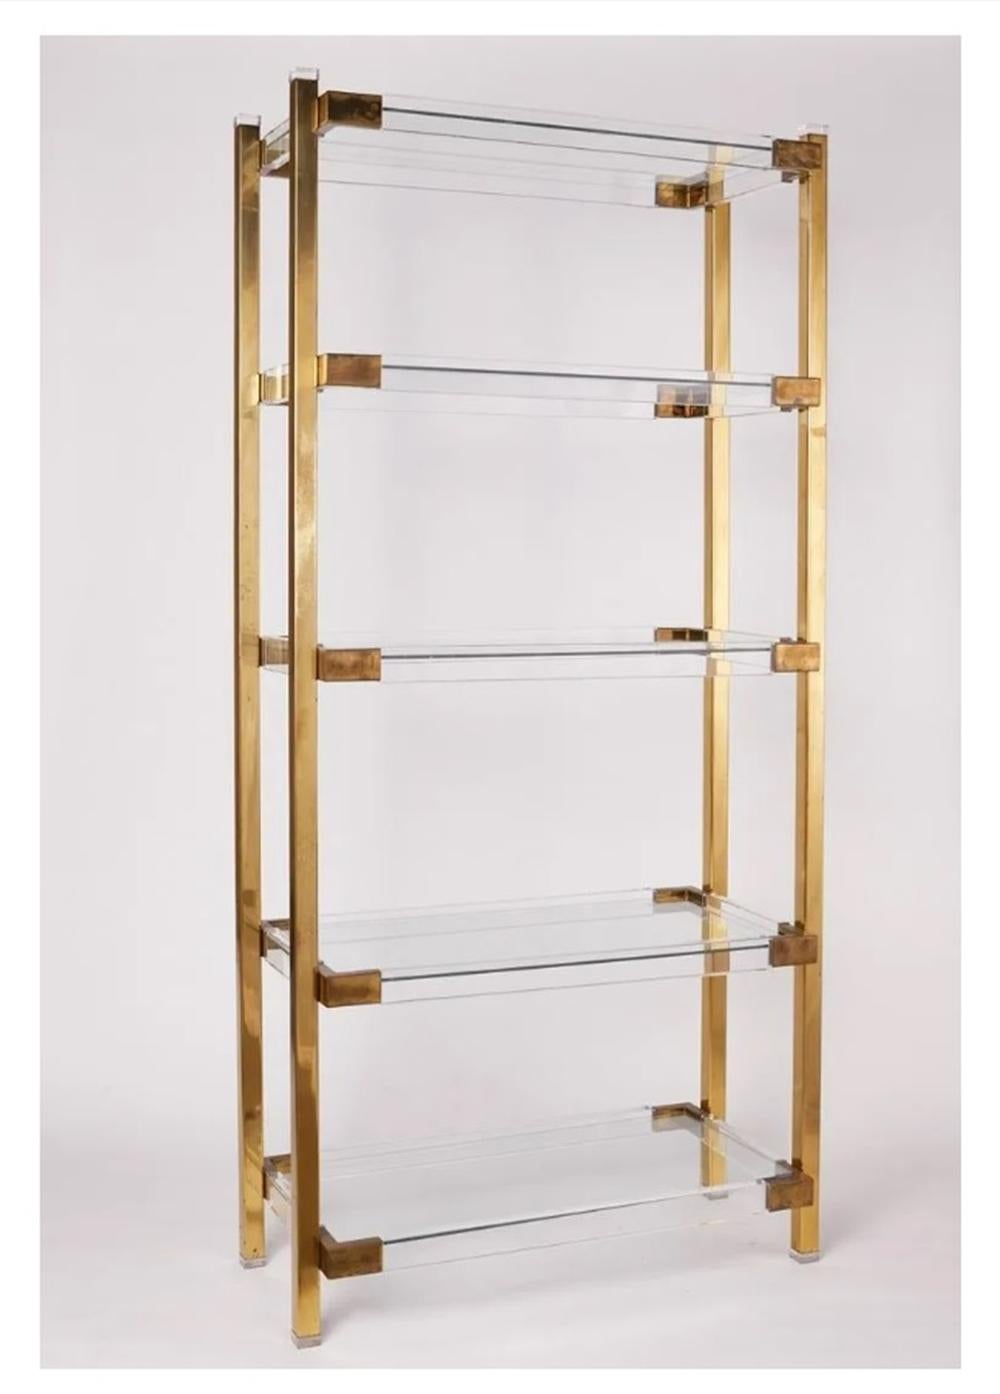 USA 1960's.

Introducing the Lucite & Brass Etagere with Five Shelves by Charles Hollis Jones, the perfect addition to your modern home décor. 

This stunning brass and glass shelf features five shelves made of clear acrylic, providing a sleek and